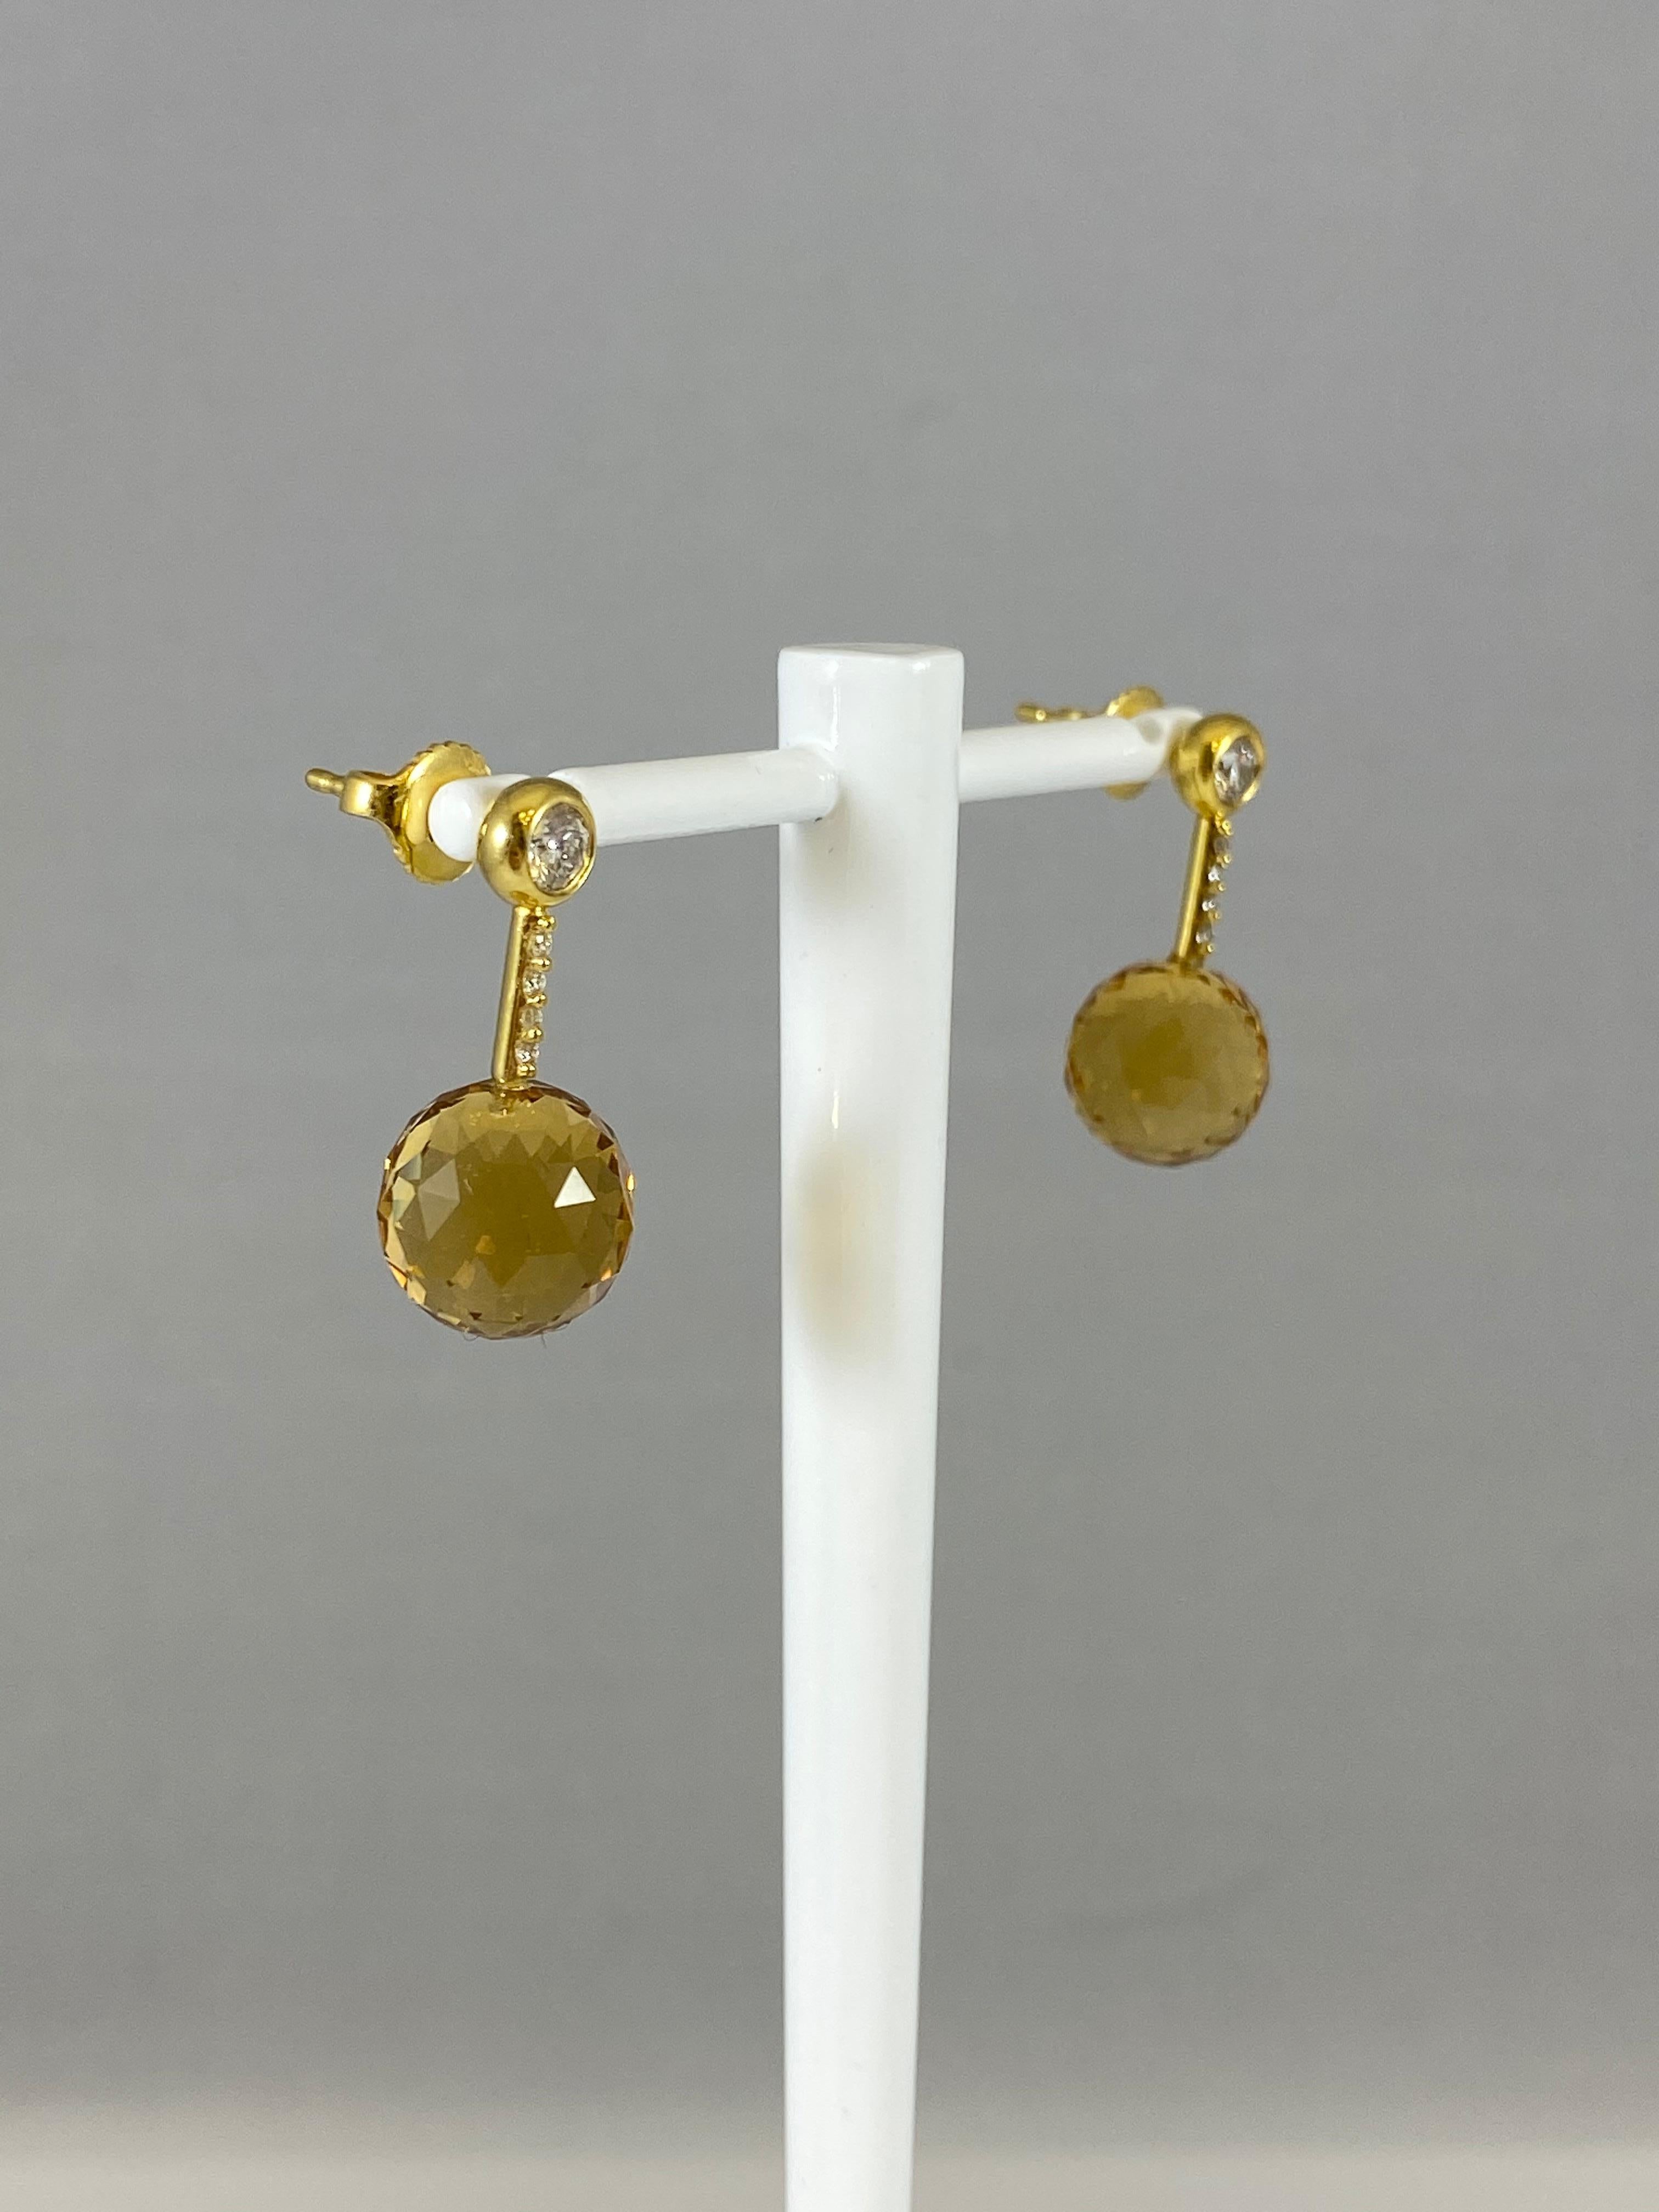 Hammerman Jewels 18 Karat Yellow Gold Diamond and Citrine Drop Earrings. 2 citrines for 15.67 carats, 10 diamonds for 0.37 carats.